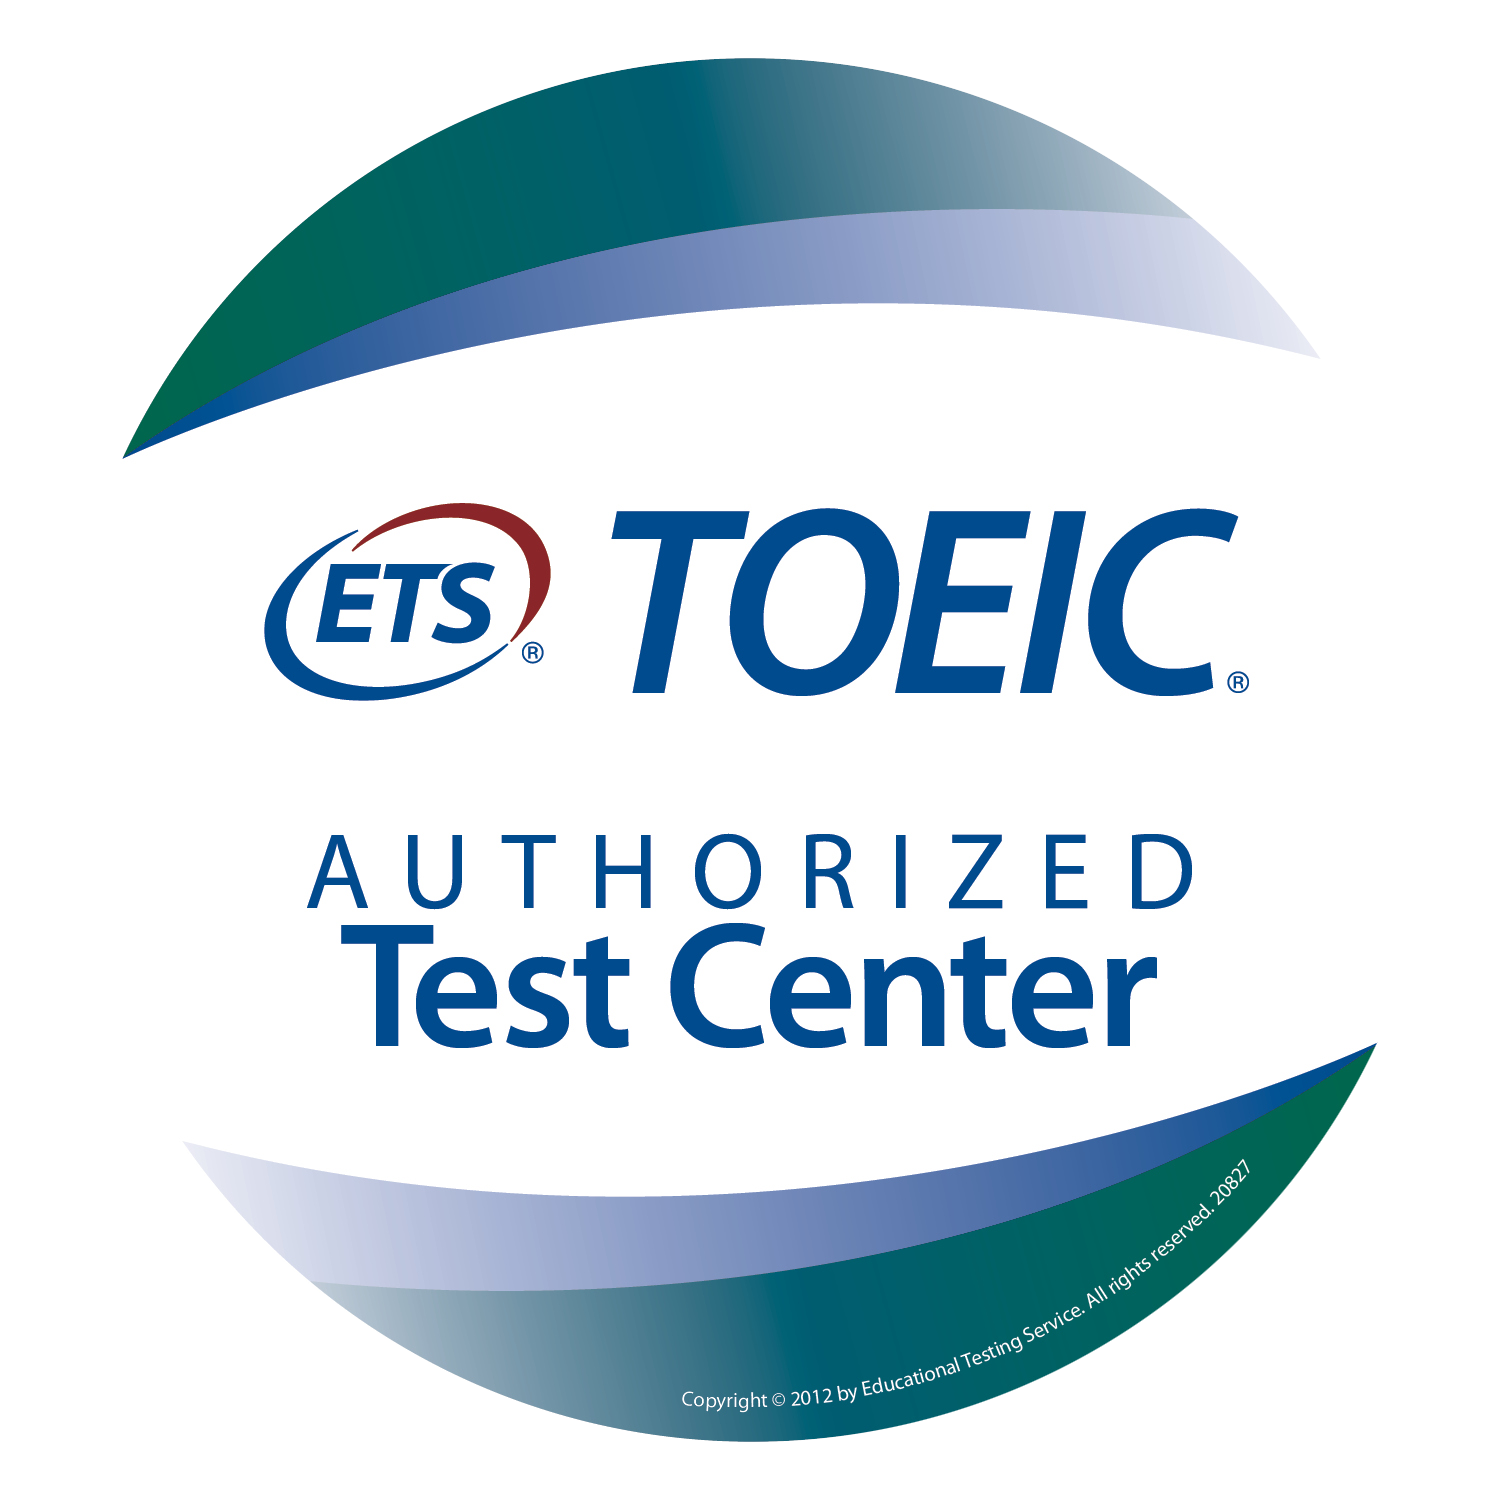 The TOEIC Test